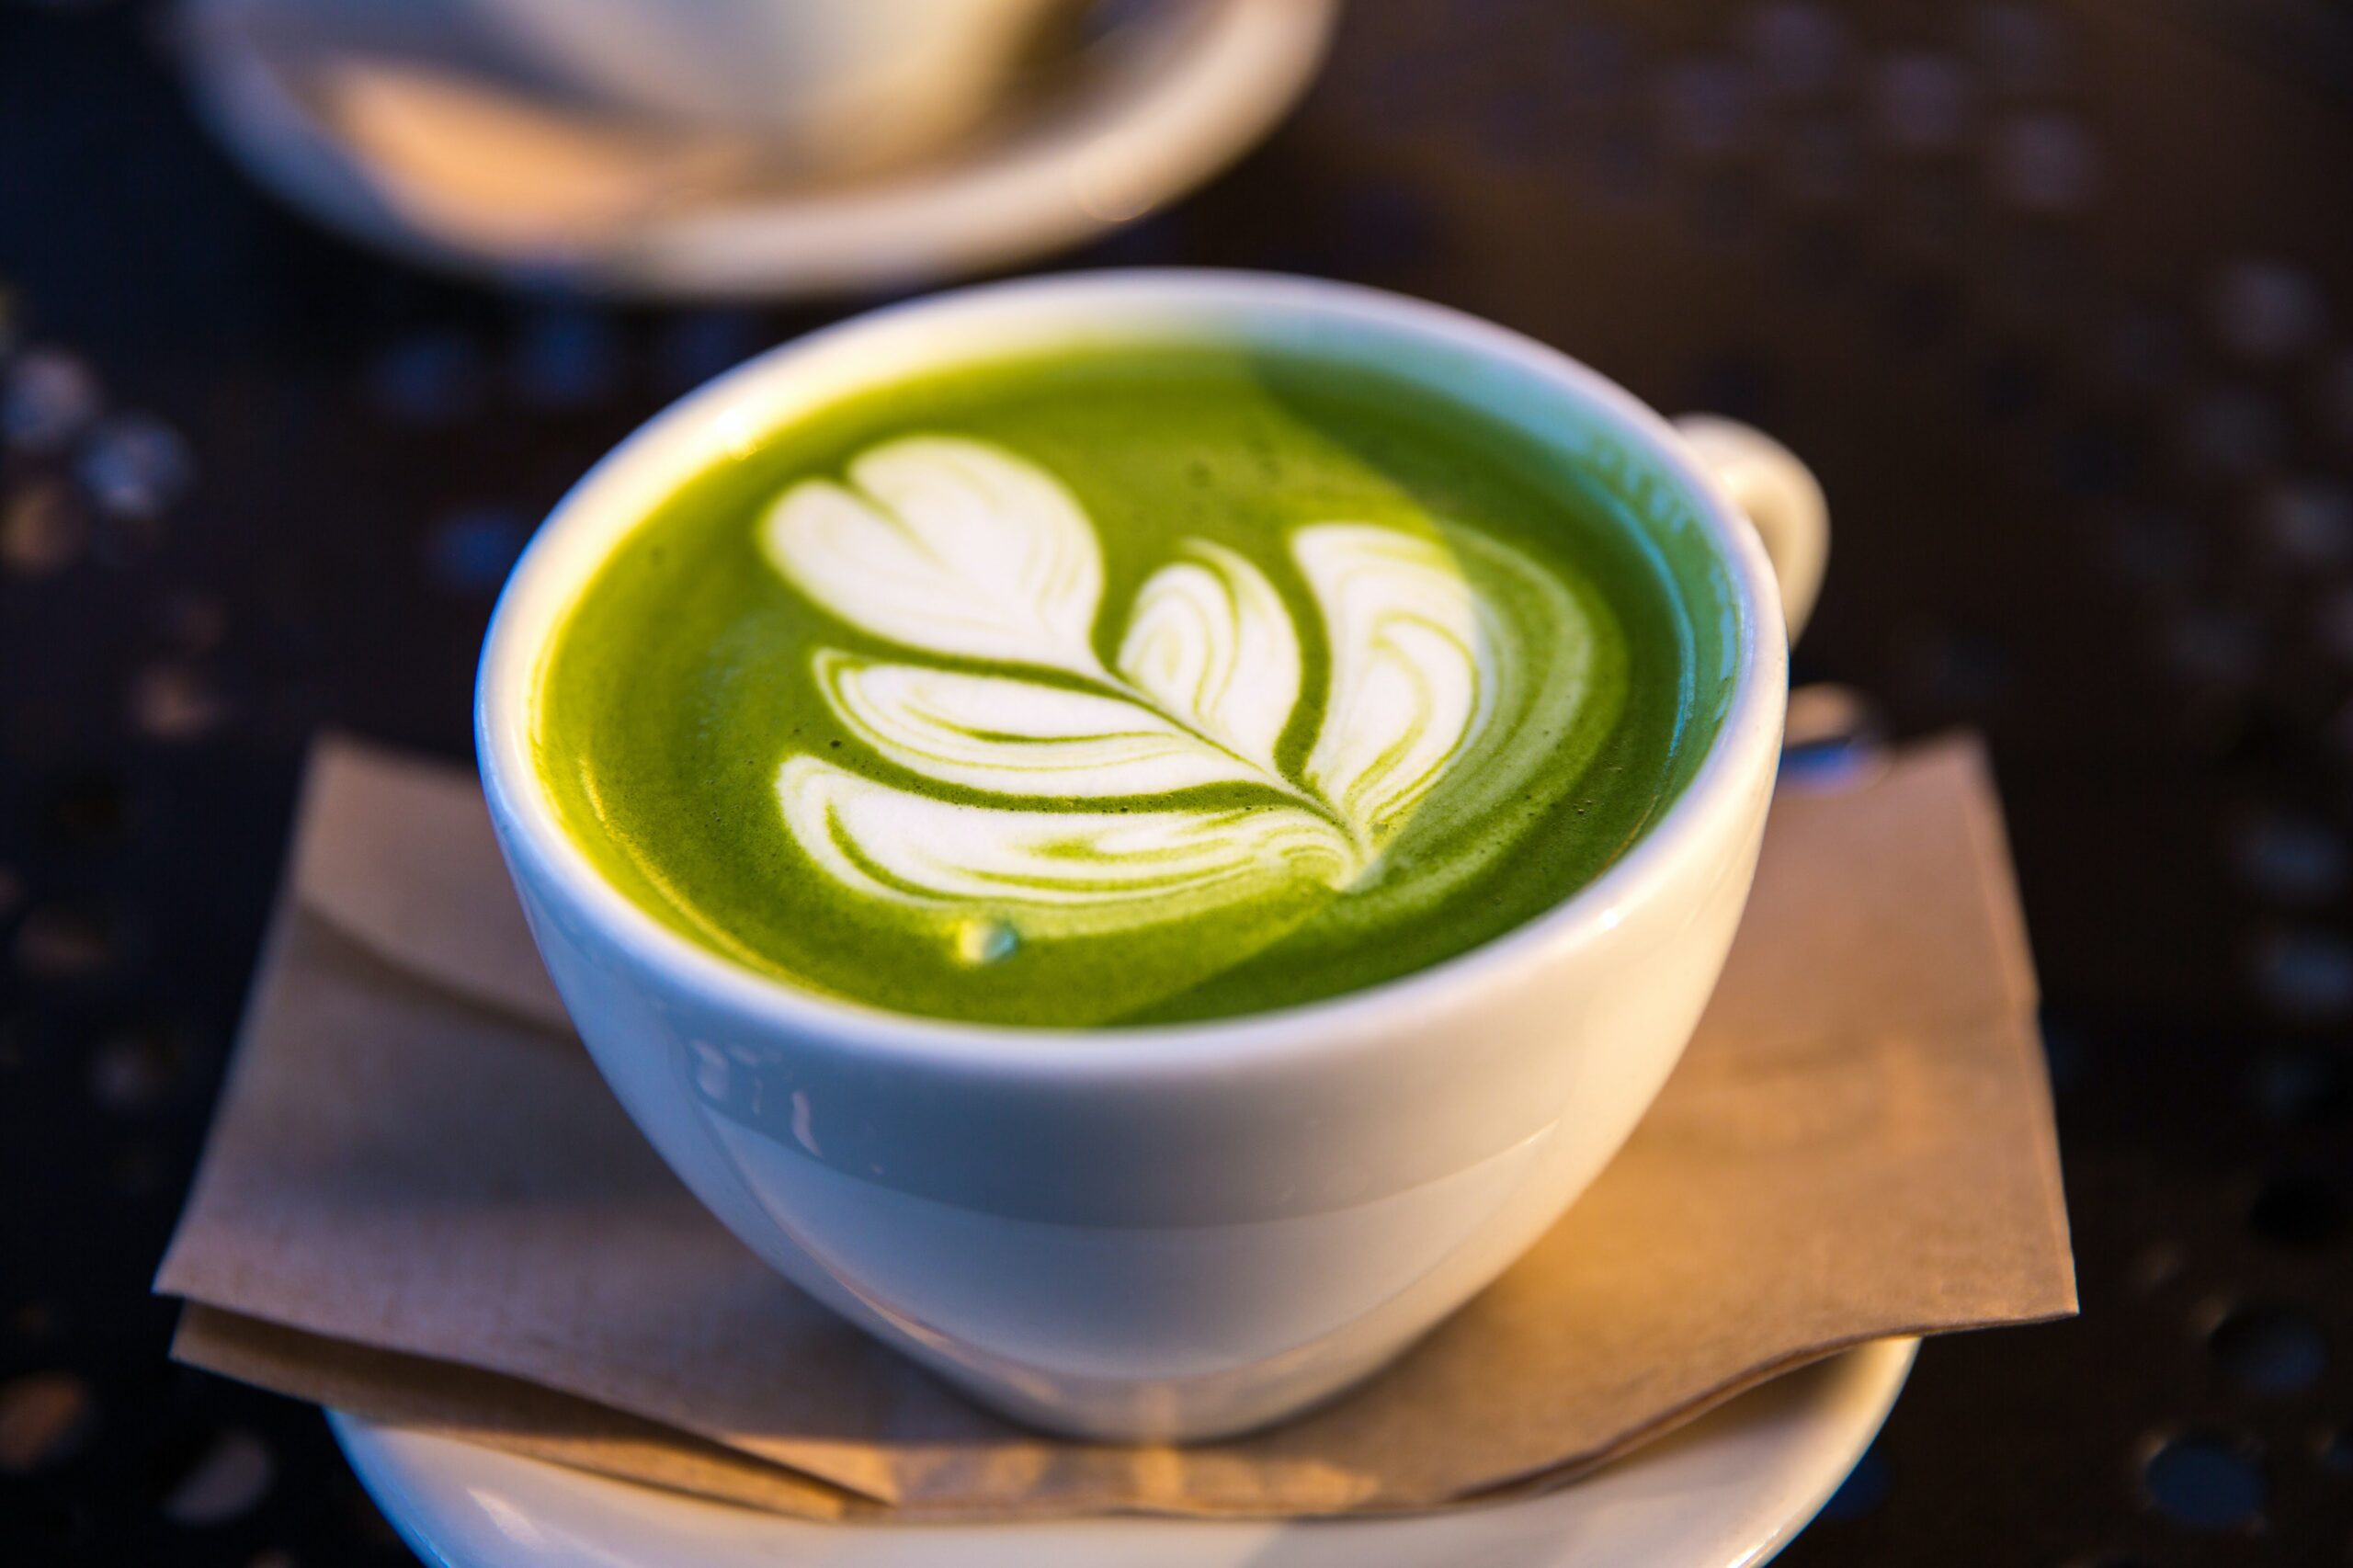 How to make matcha latte – recommended tools and milk